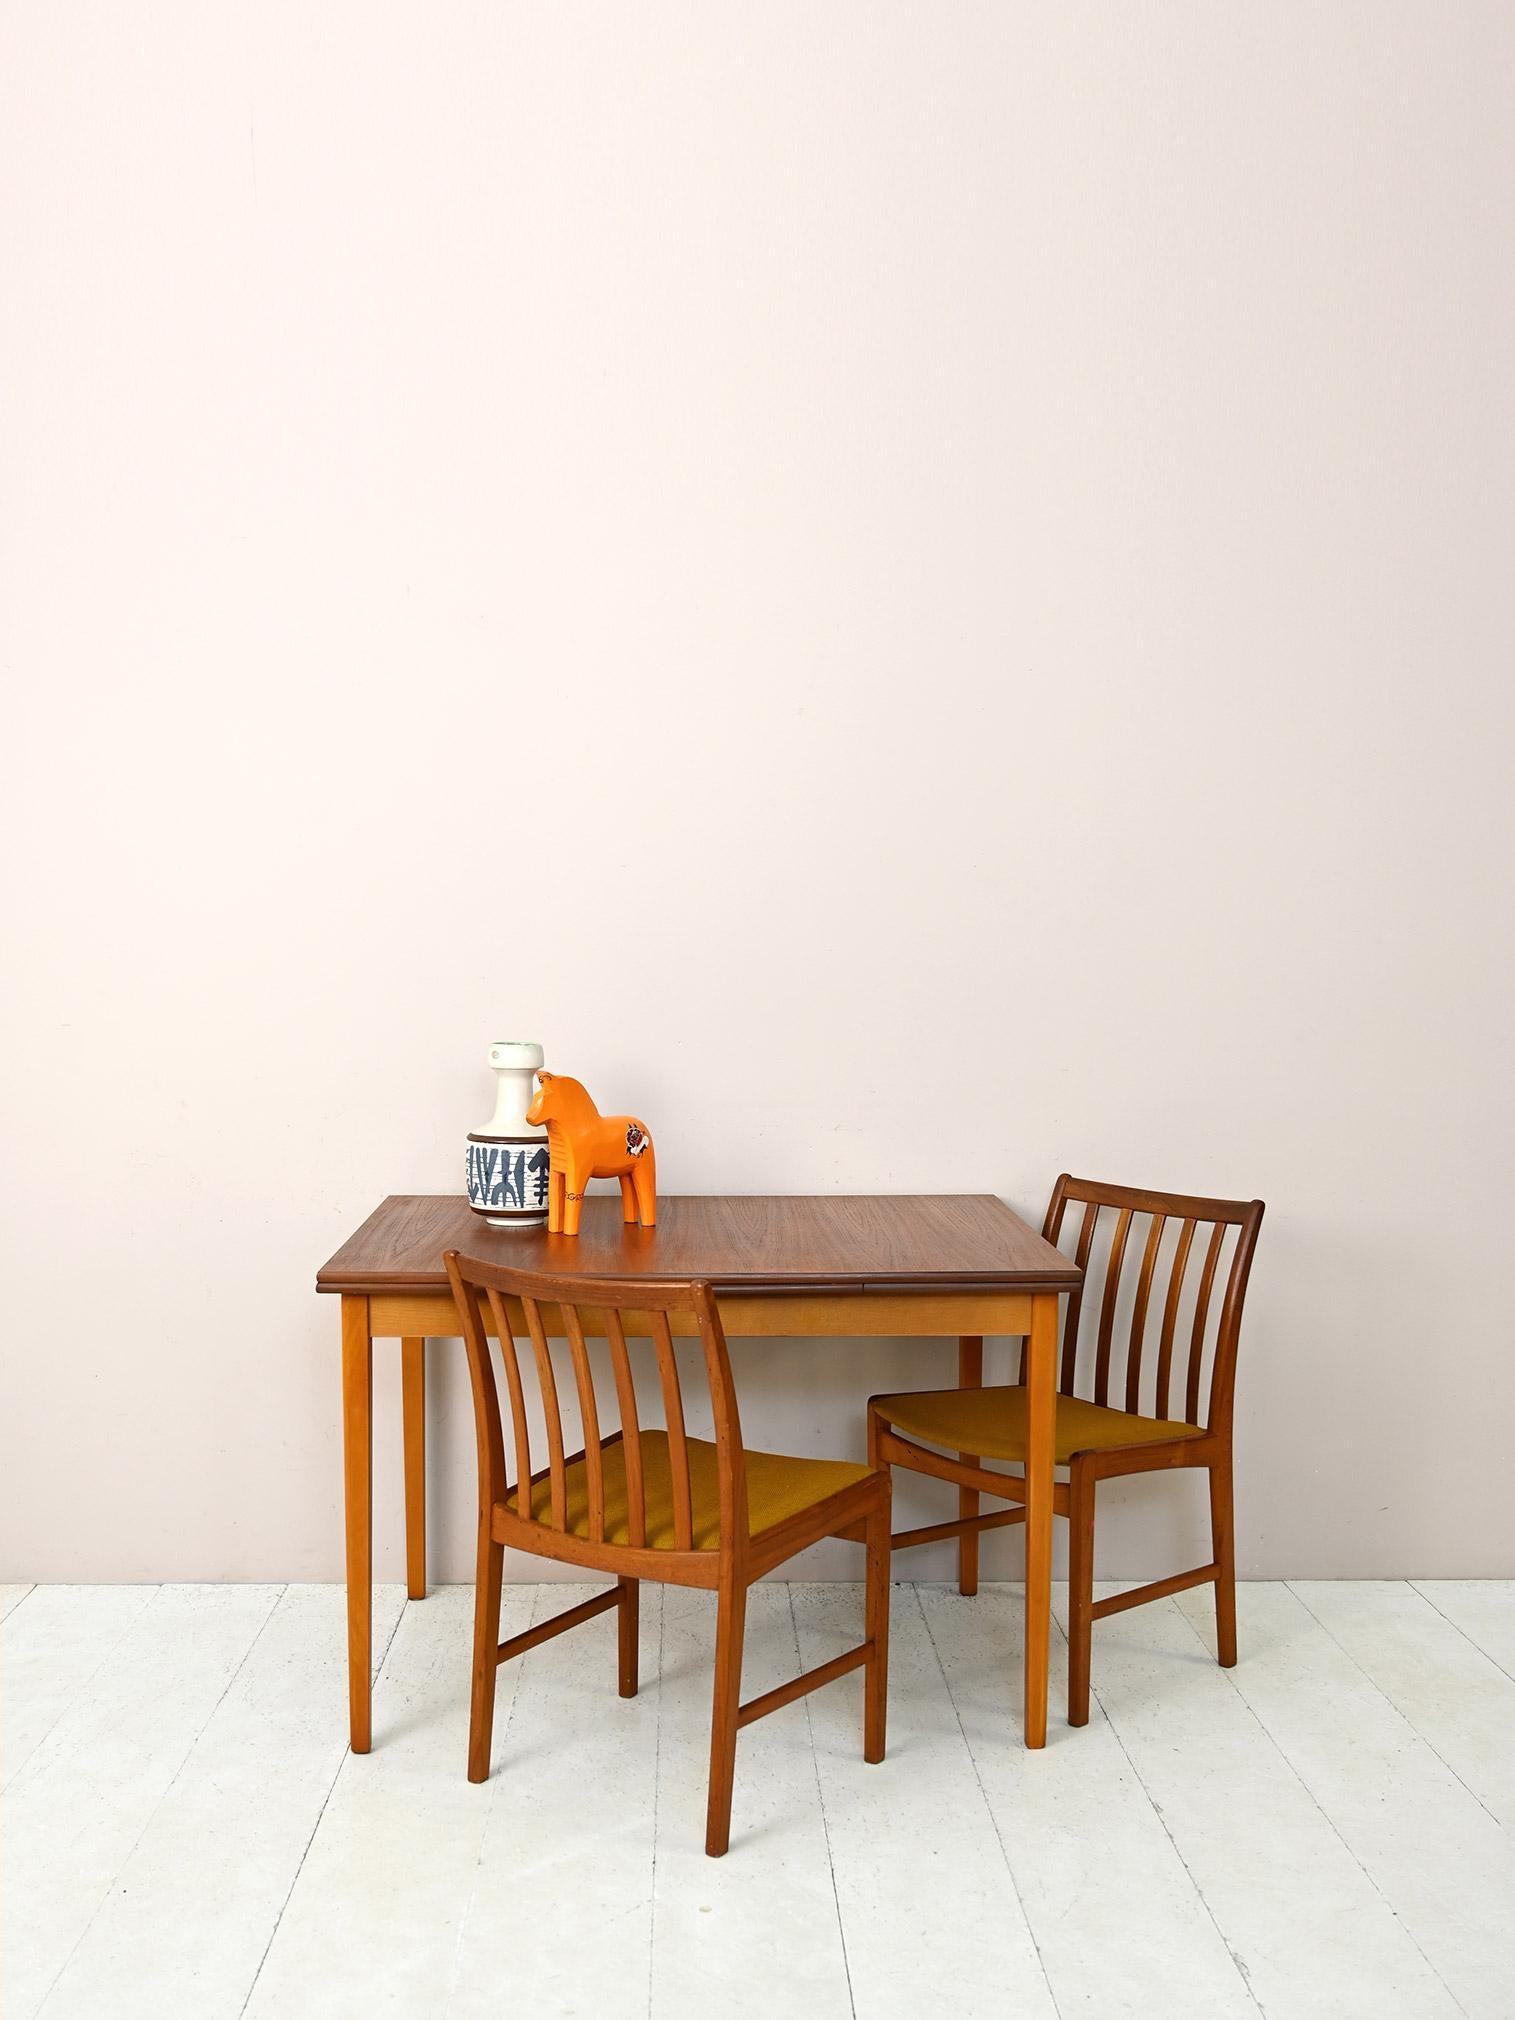 1960s dining table with teak top.

This modern and functional piece of furniture is characterized by the fact that it can be extended thanks to the pull-out planks located on the two short sides.
The deep color and pronounced teak wood grain of the